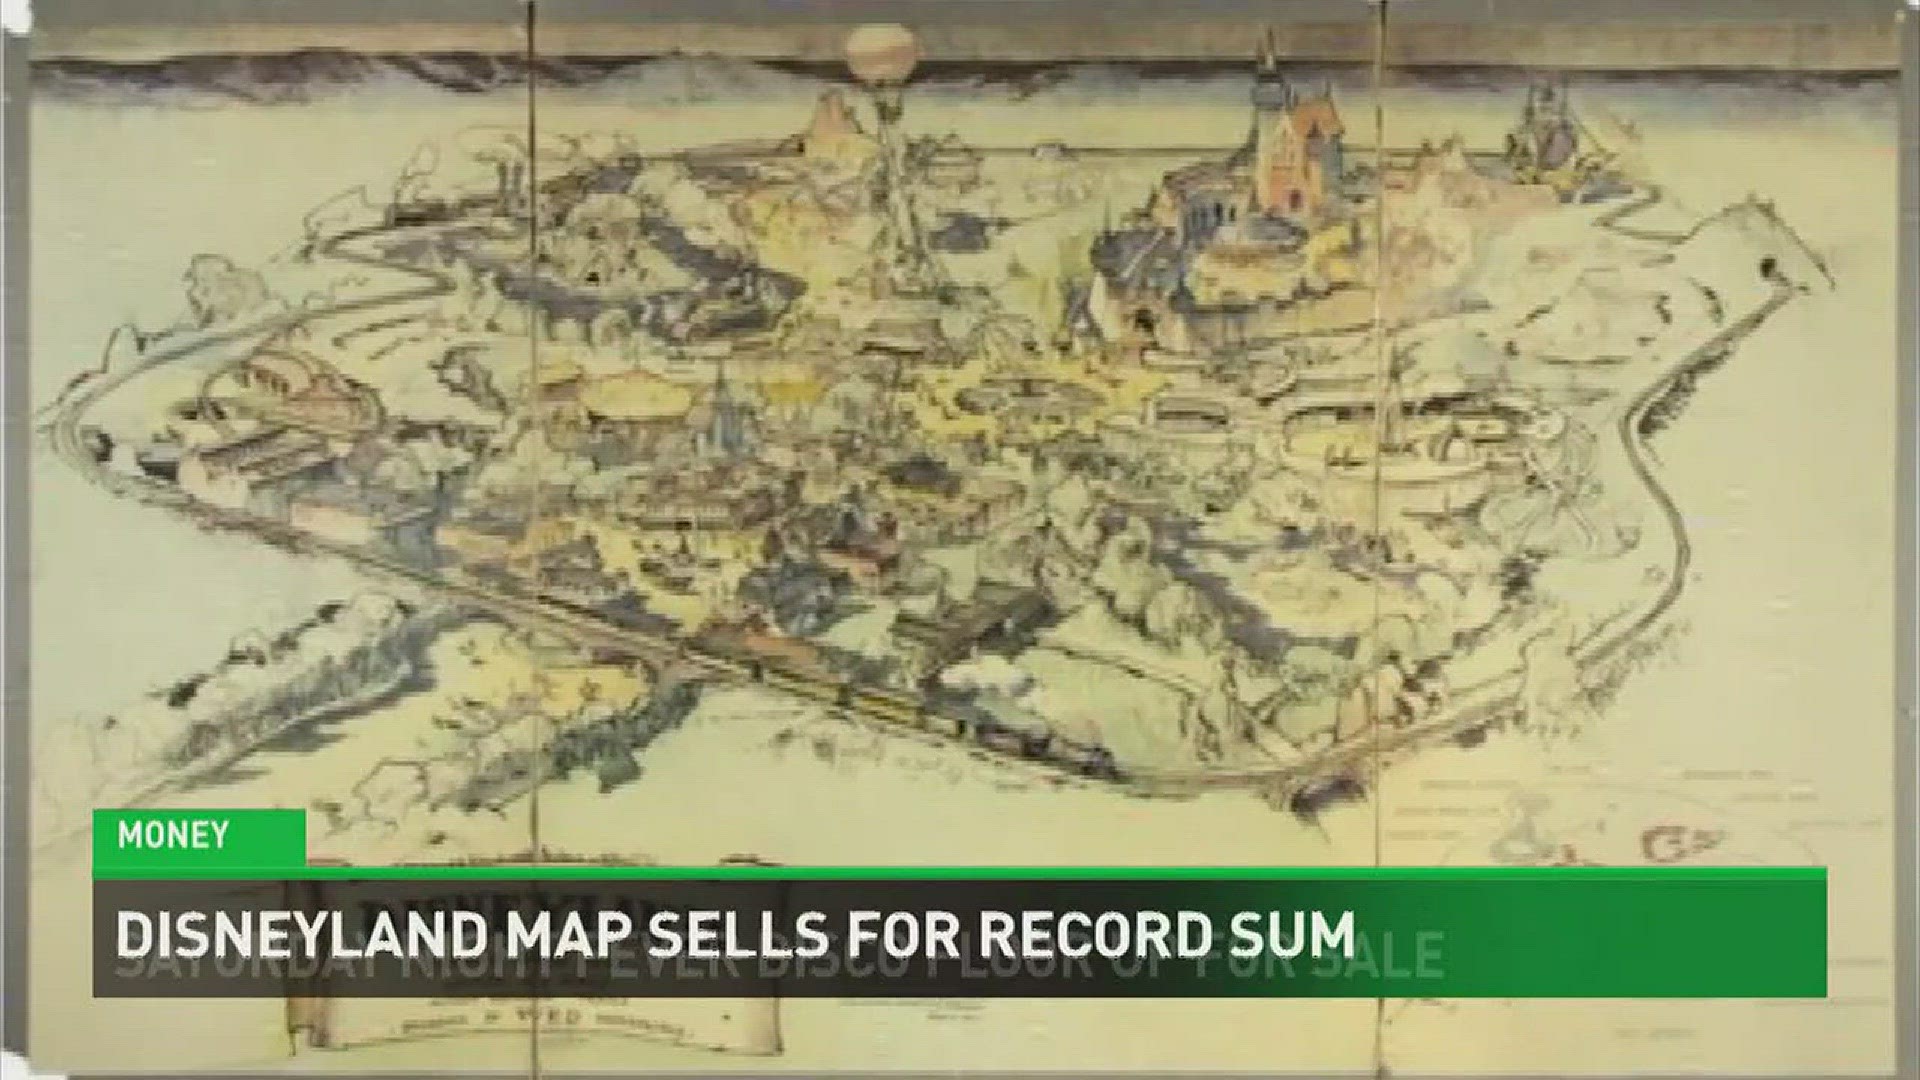 A rare Disneyland map created by Walt Disney himself sold for a whopping $708,000.